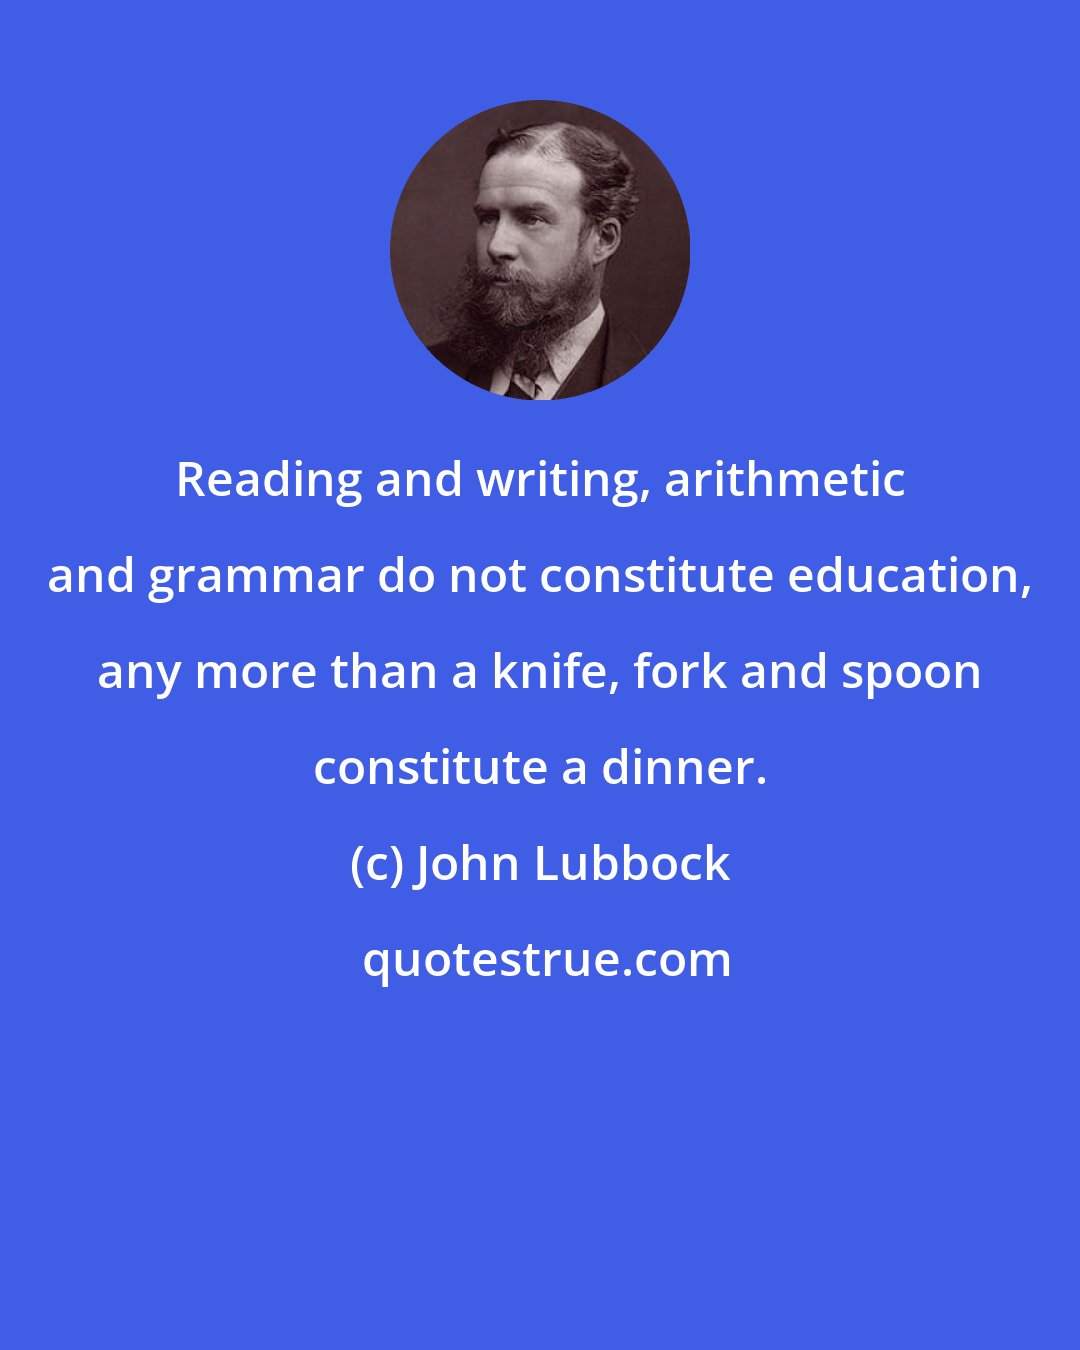 John Lubbock: Reading and writing, arithmetic and grammar do not constitute education, any more than a knife, fork and spoon constitute a dinner.